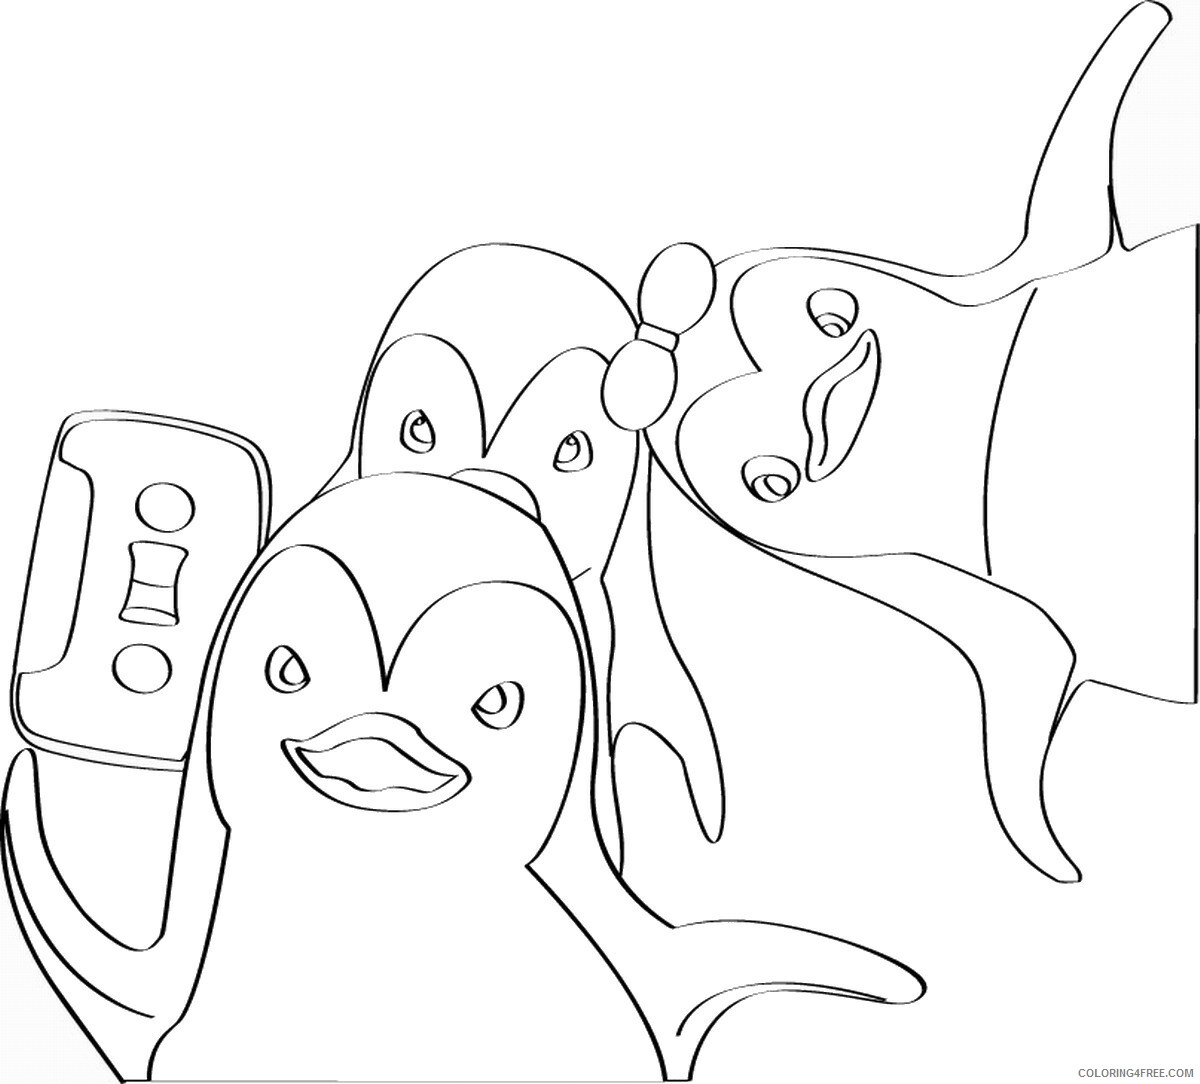 Ozie Boo Coloring Pages TV Film Ozie_Boo_cl_07 Printable 2020 05859 Coloring4free